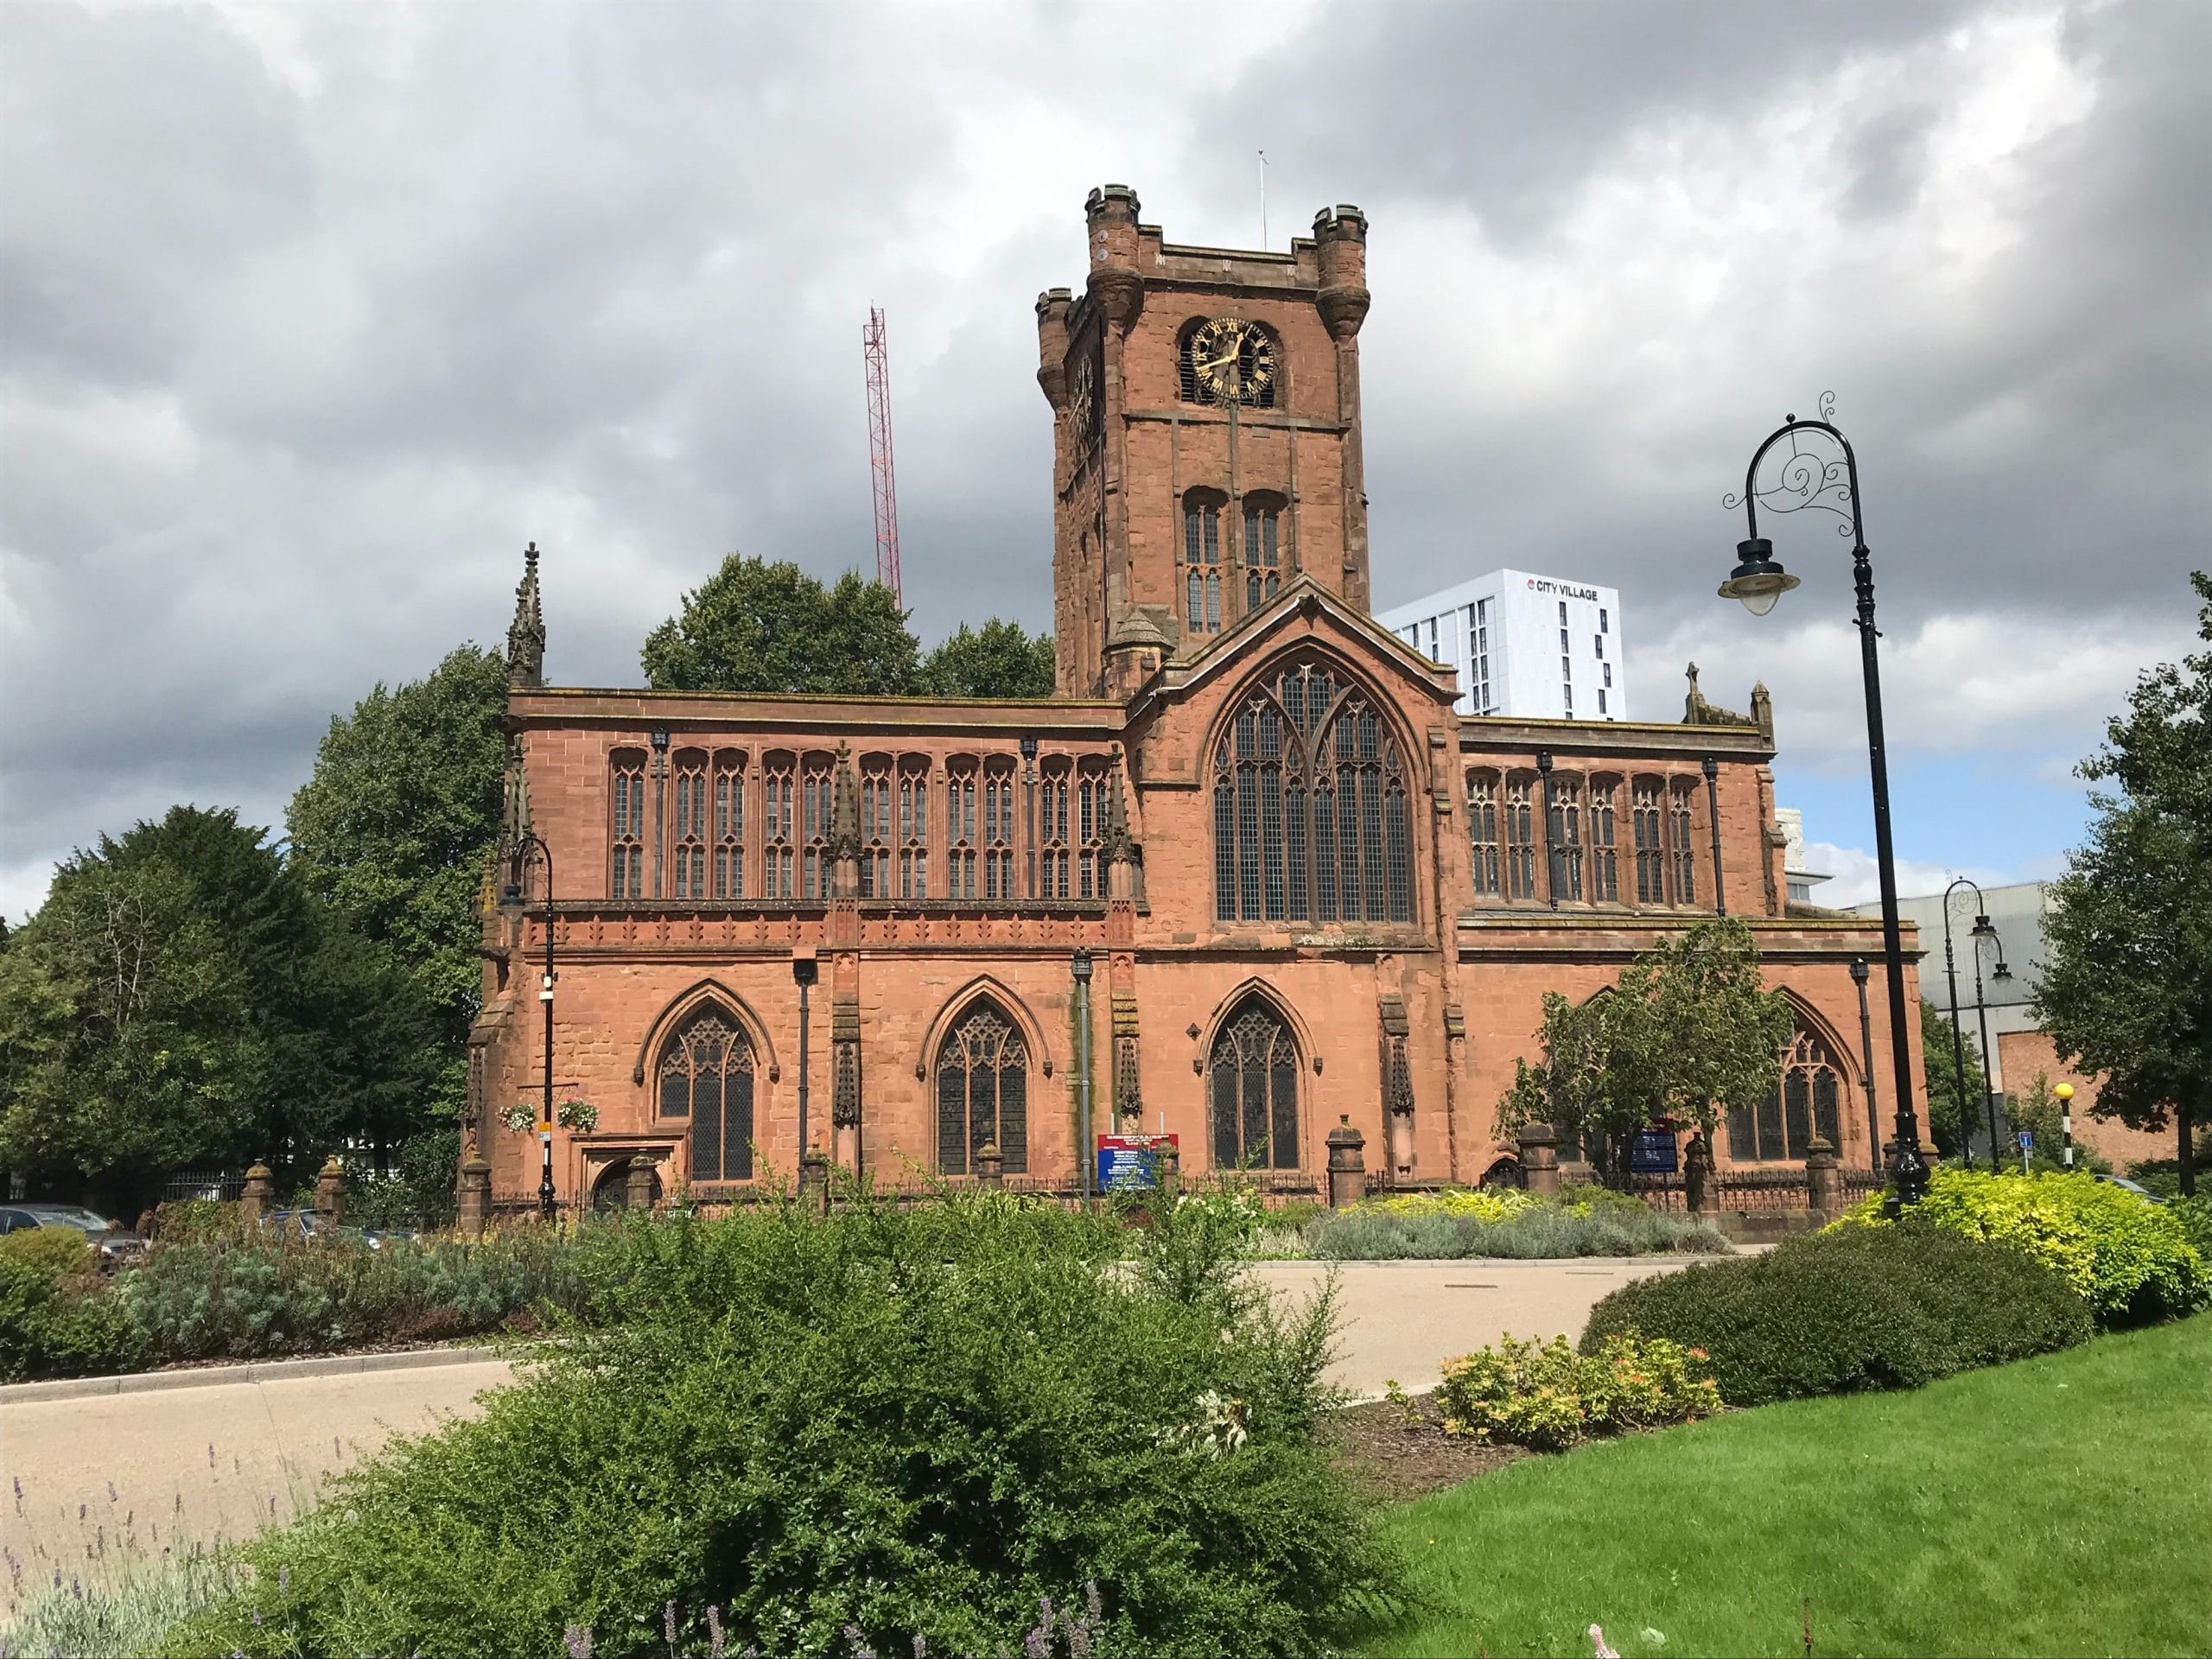 St John the Baptist church in Coventry photographed on a cloudy day.